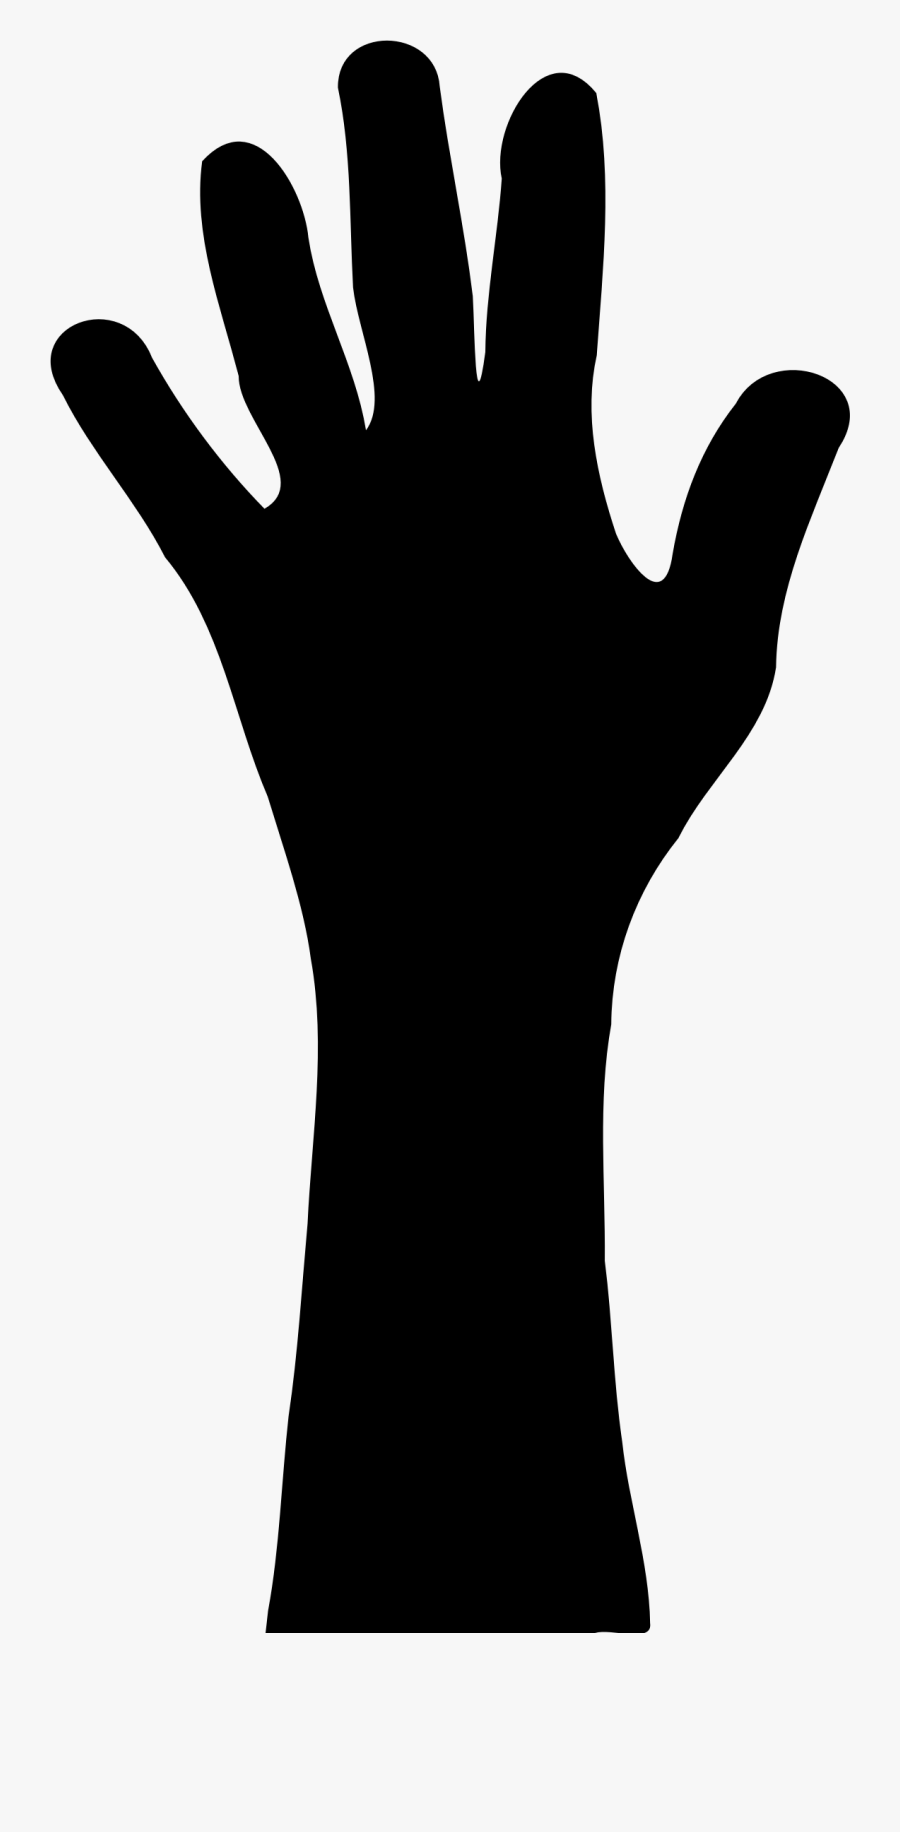 Hand In Silhouette Big - Raised Hand Silhouette, Transparent Clipart